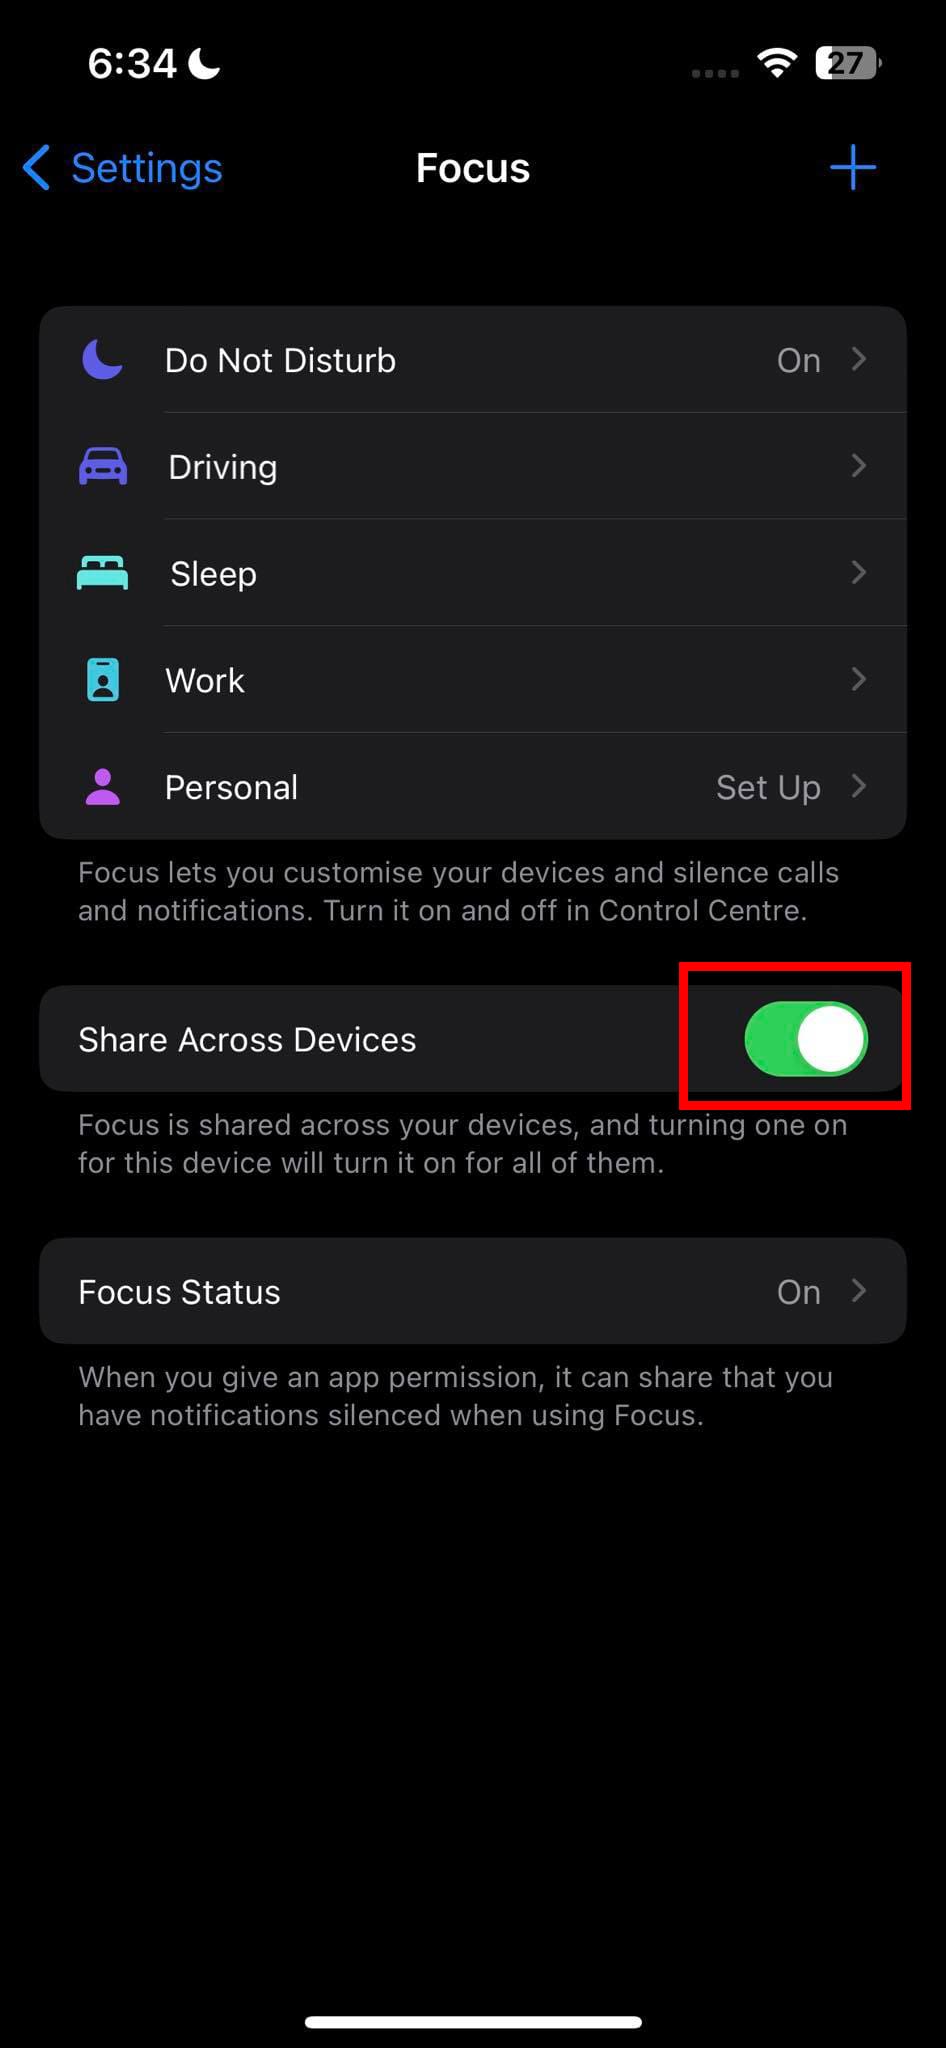 How to disable Shared Across Devices